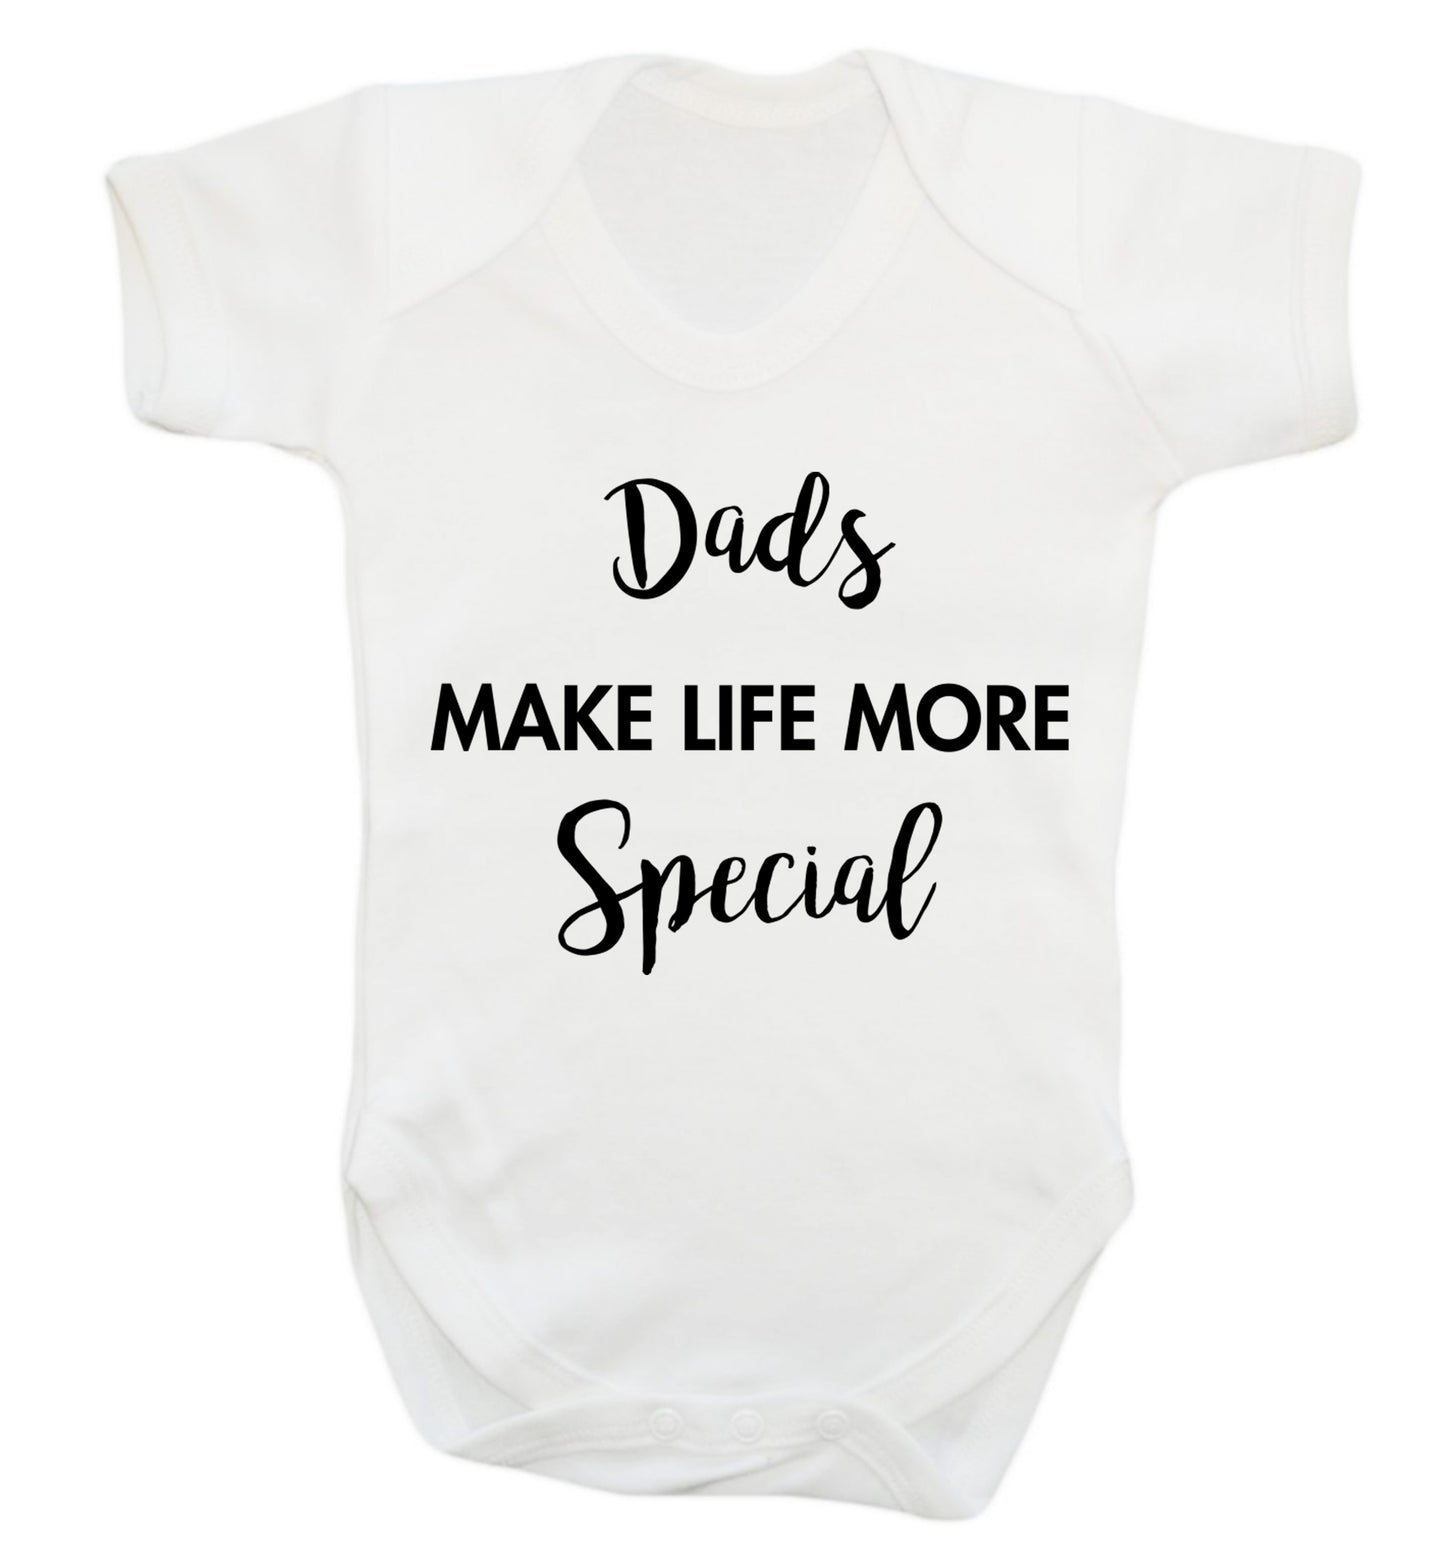 Dads make life more special Baby Vest white 18-24 months